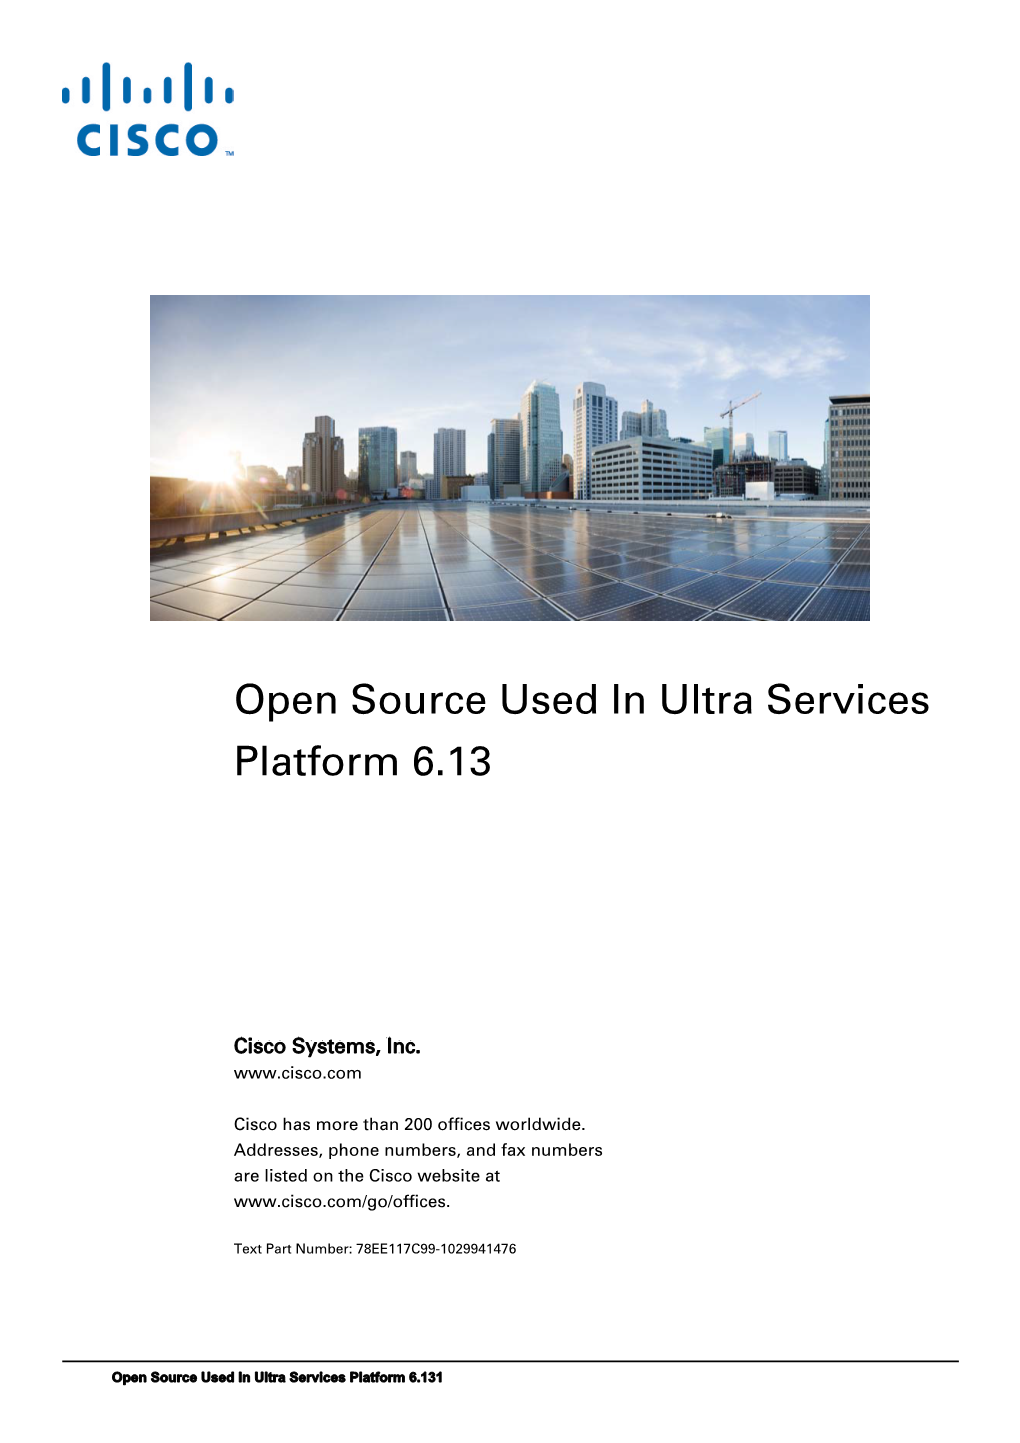 Open Source Used in Ultra Services Platform 6.13